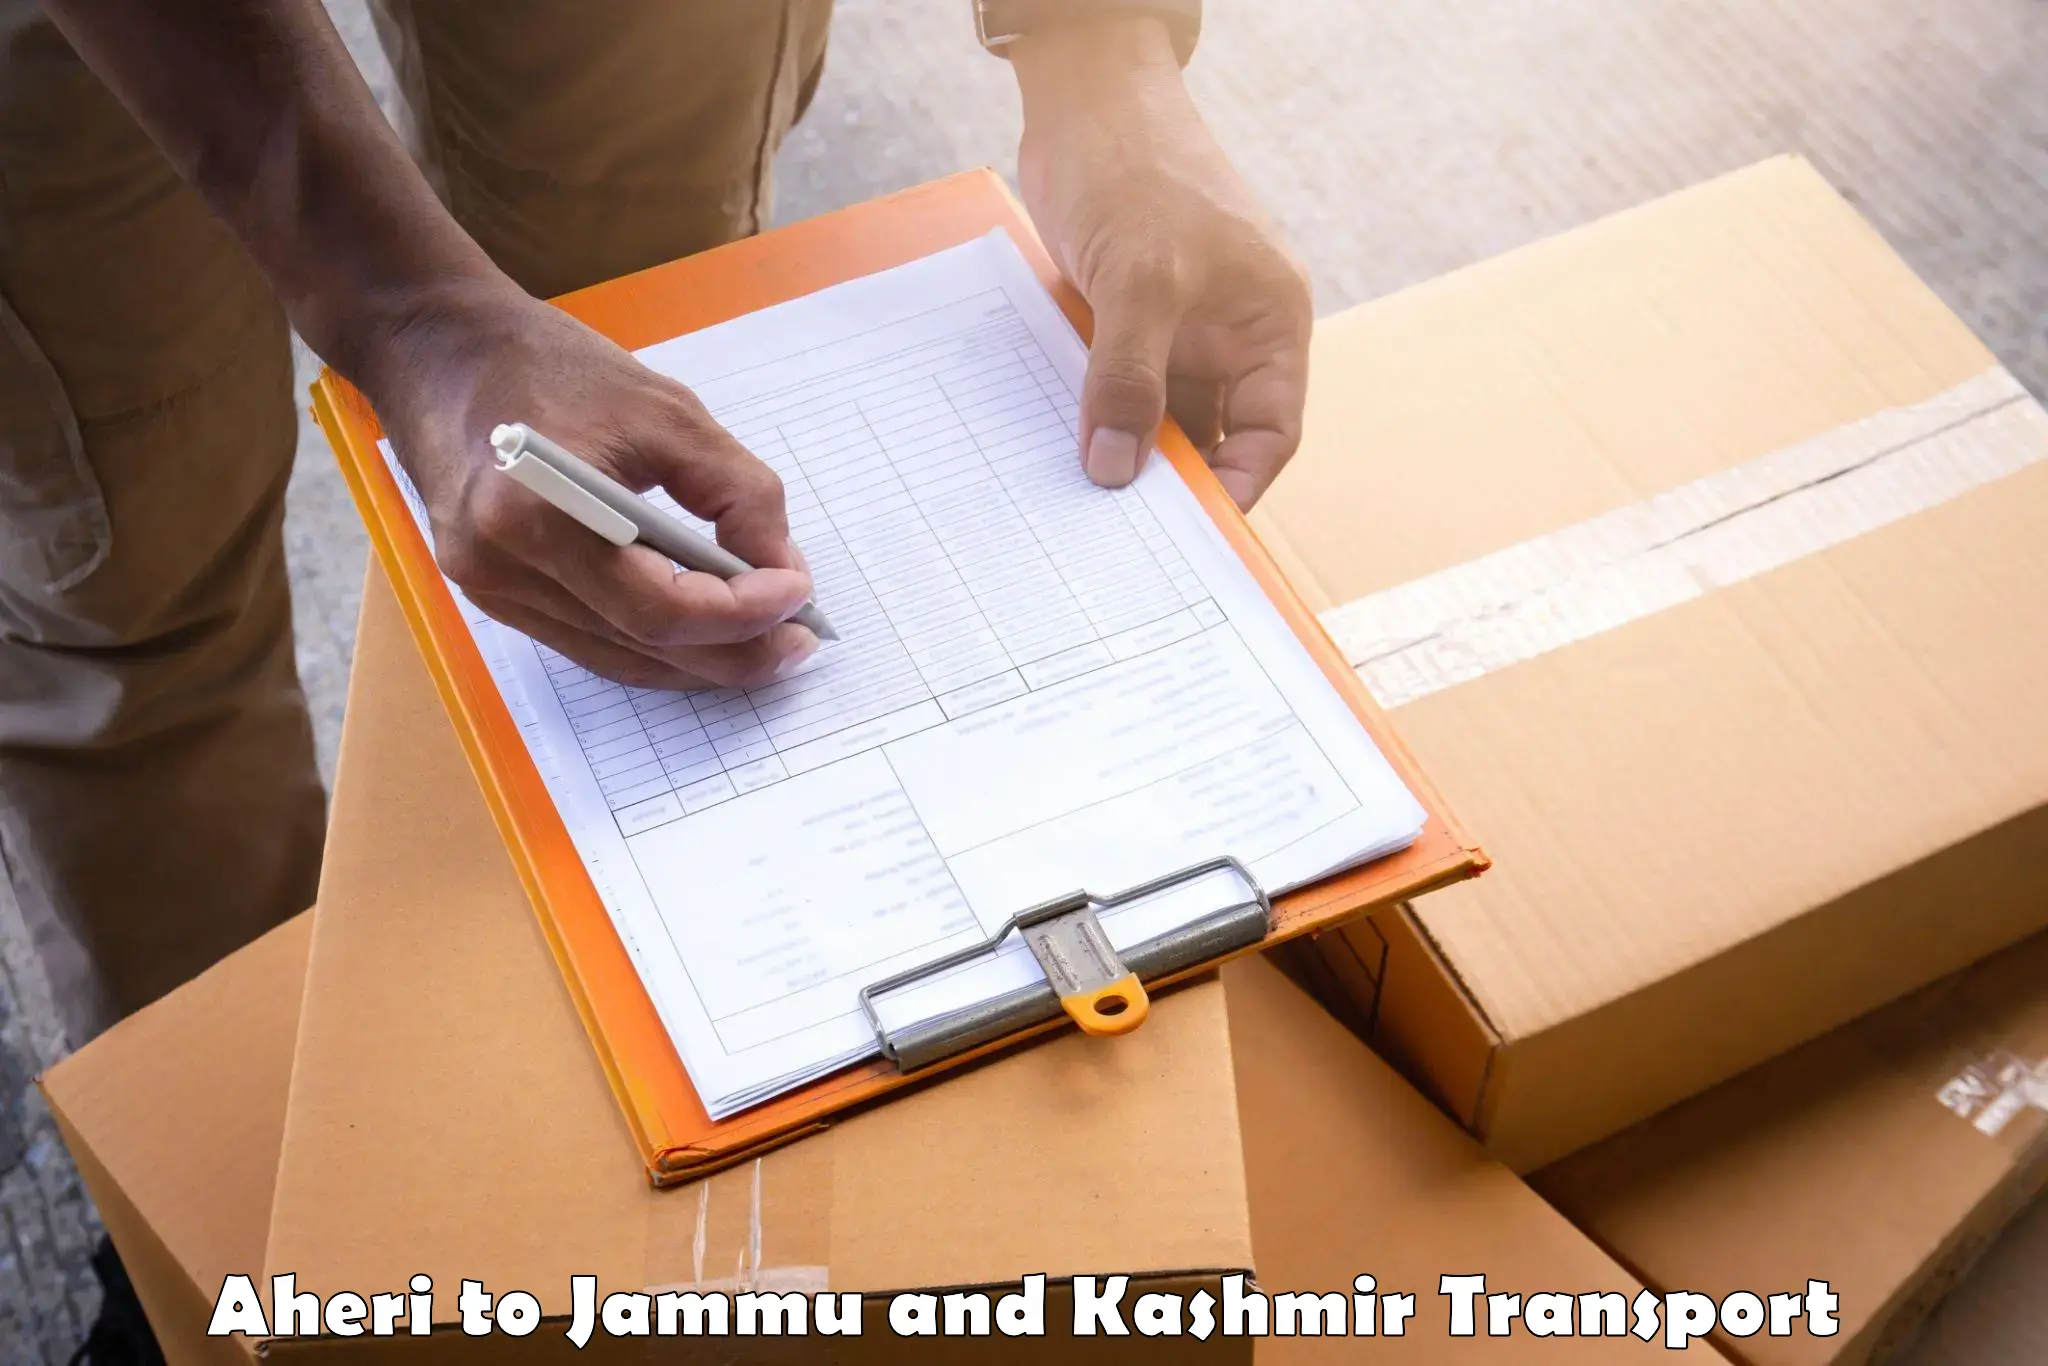 Container transport service in Aheri to University of Jammu